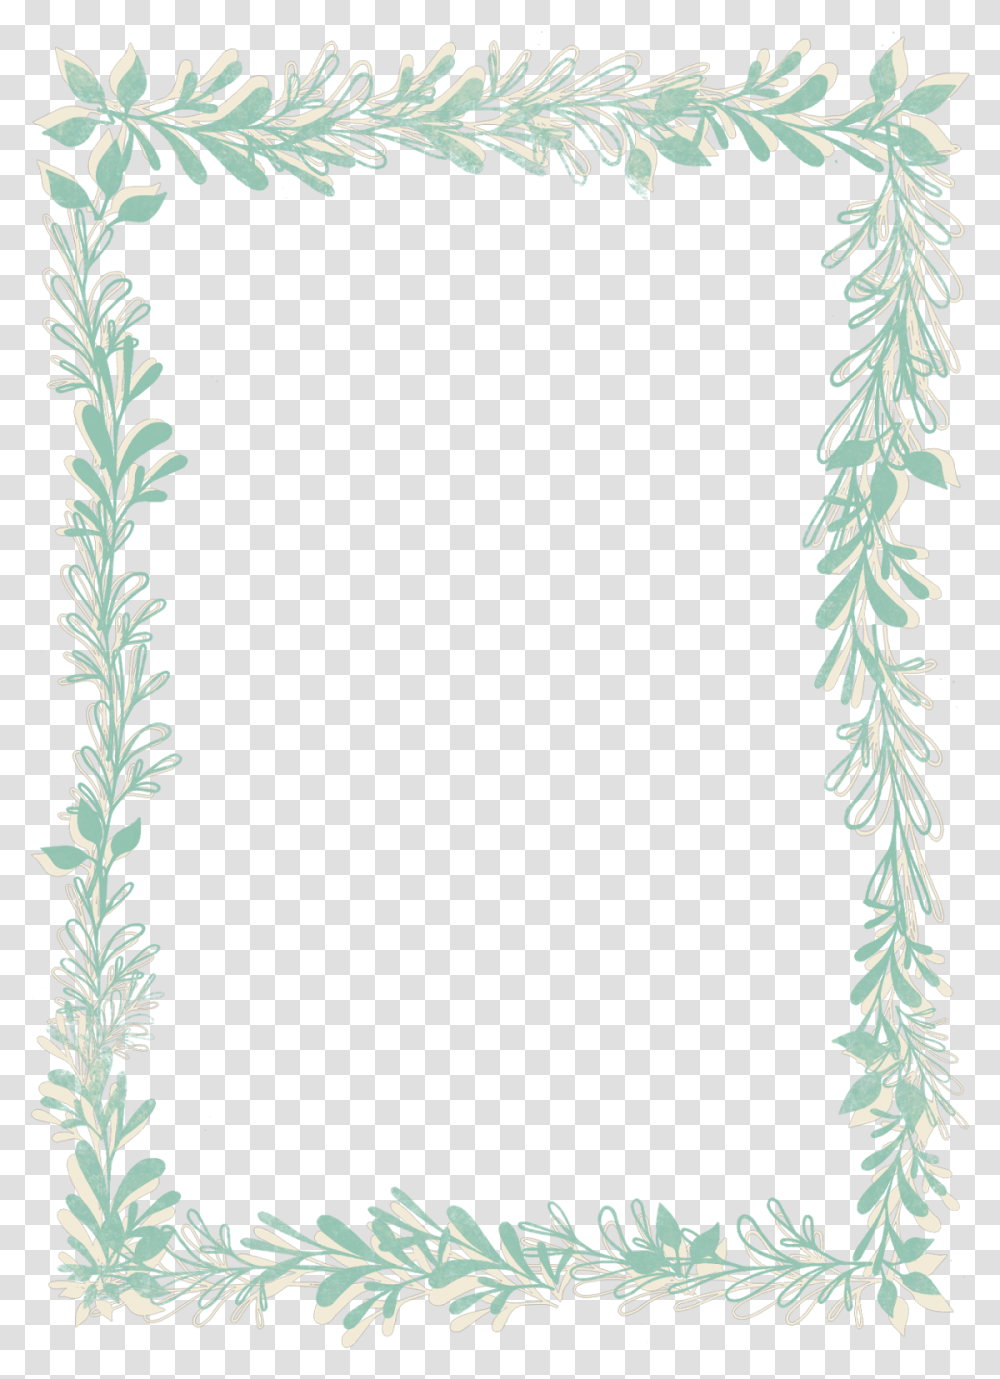 Hd Picture Frames Watercolor Painting 1179083 Watercolor Leaves Frame, Plant, Potted Plant, Vase, Jar Transparent Png